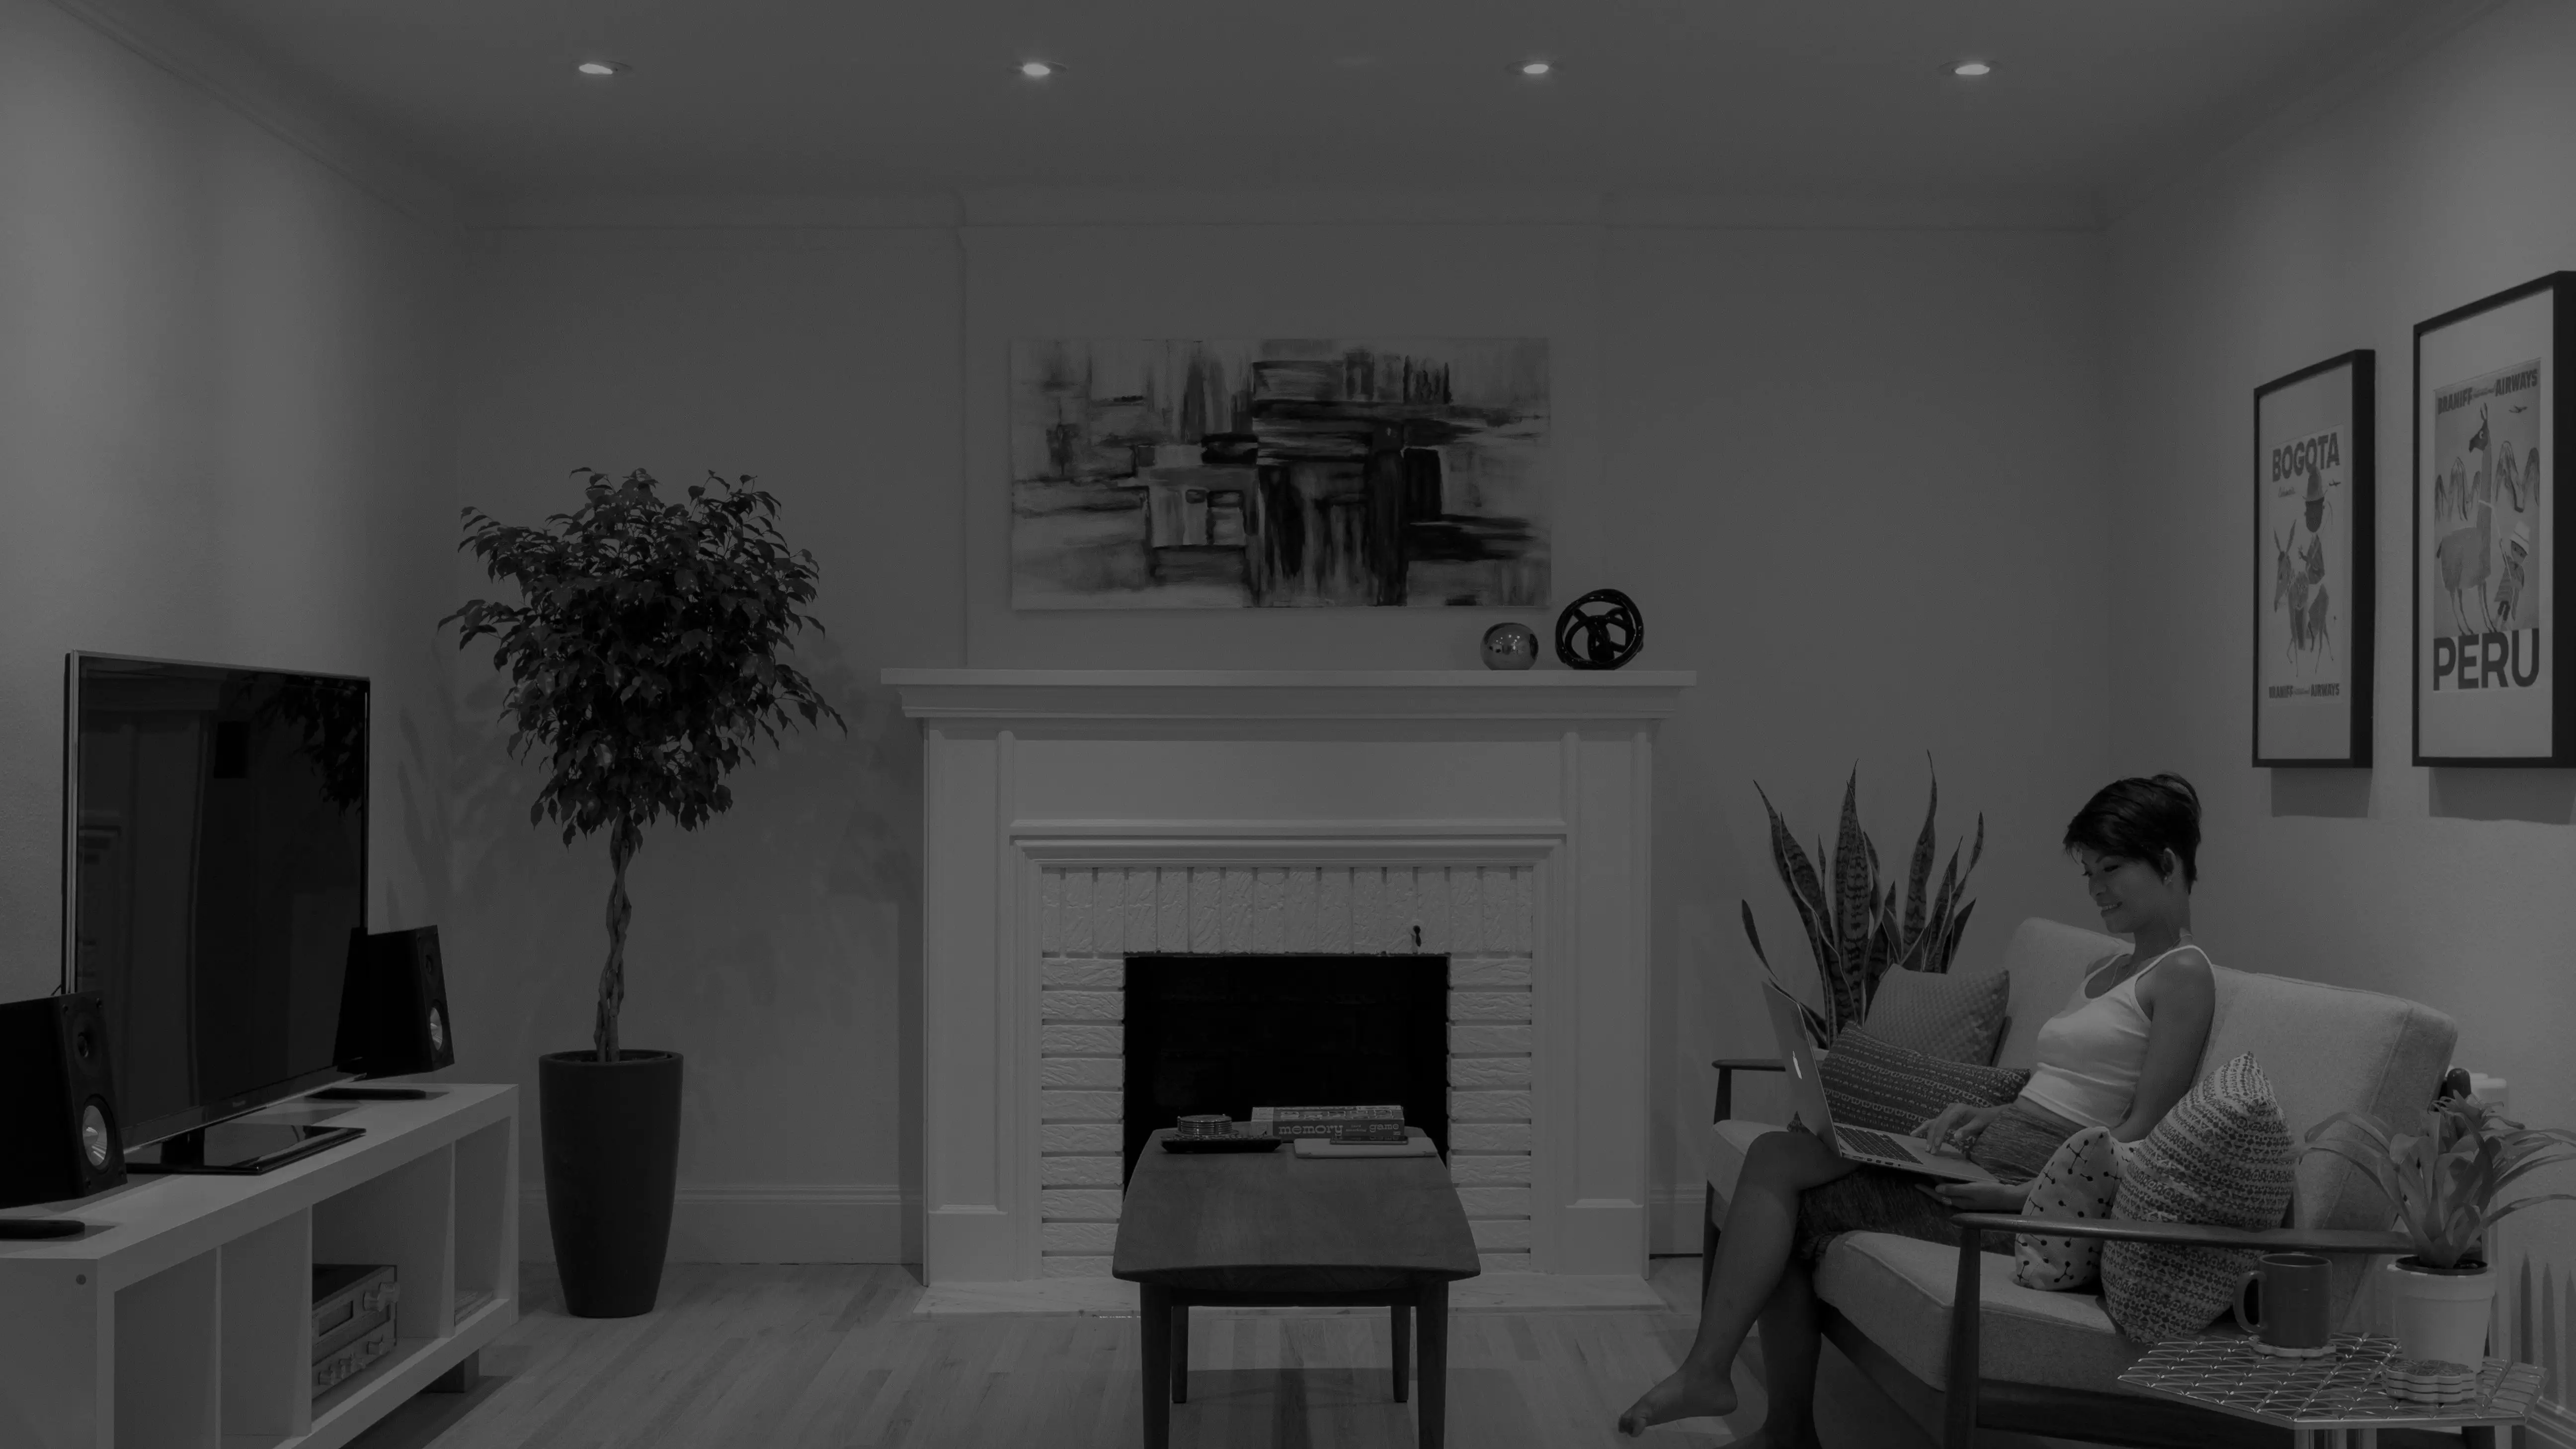 Originally authored for net magazine, this article details how to create an immersive media experience with the Philips Hue API.